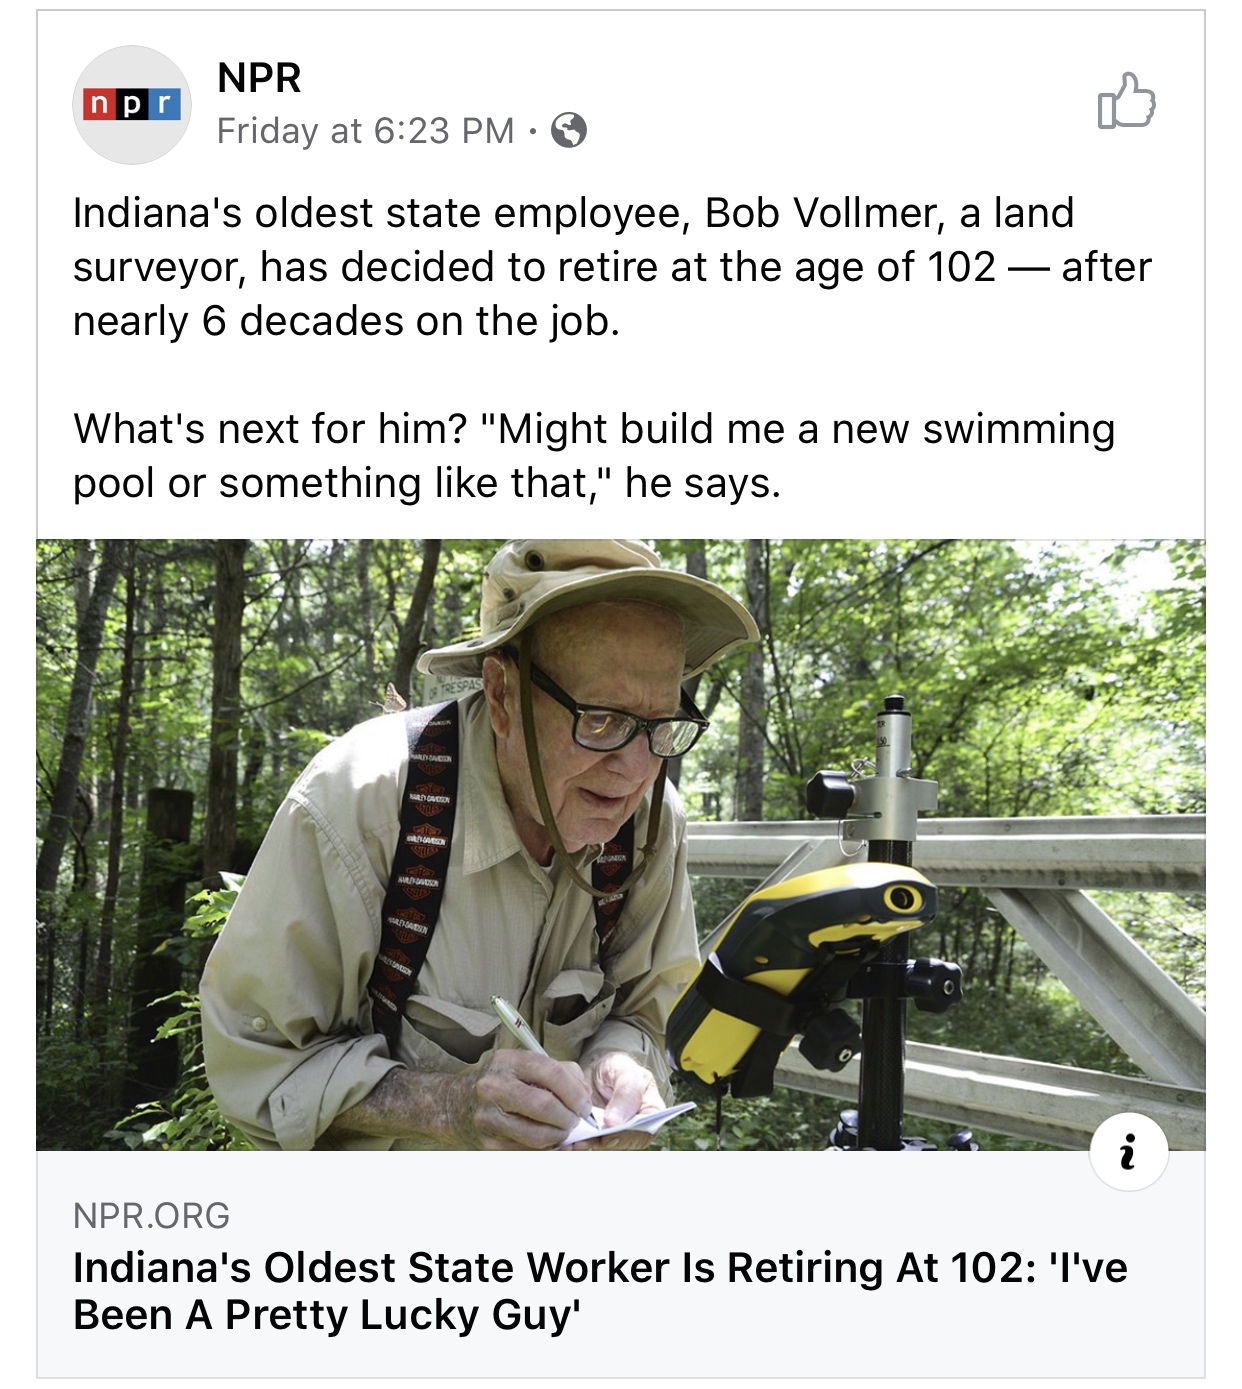 npr: music - Npr Friday at Indiana's oldest state employee, Bob Vollmer, a land surveyor, has decided to retire at the age of 102after nearly 6 decades on the job. What's next for him? "Might build me a new swimming pool or something that," he says. Npr.O